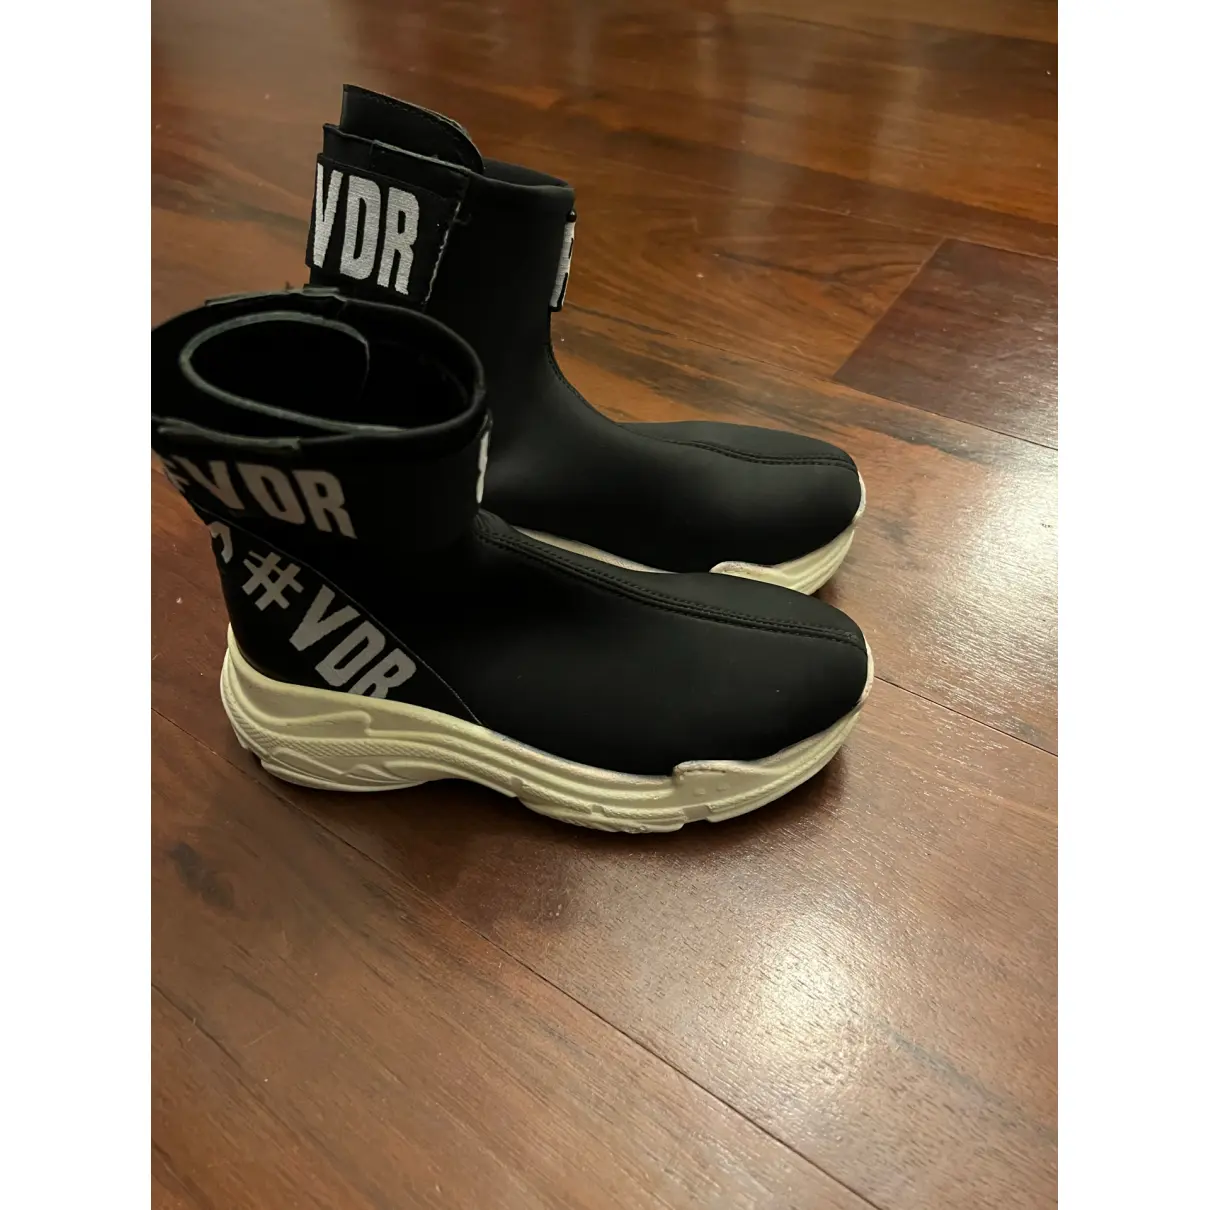 Buy VDR Cloth ankle boots online